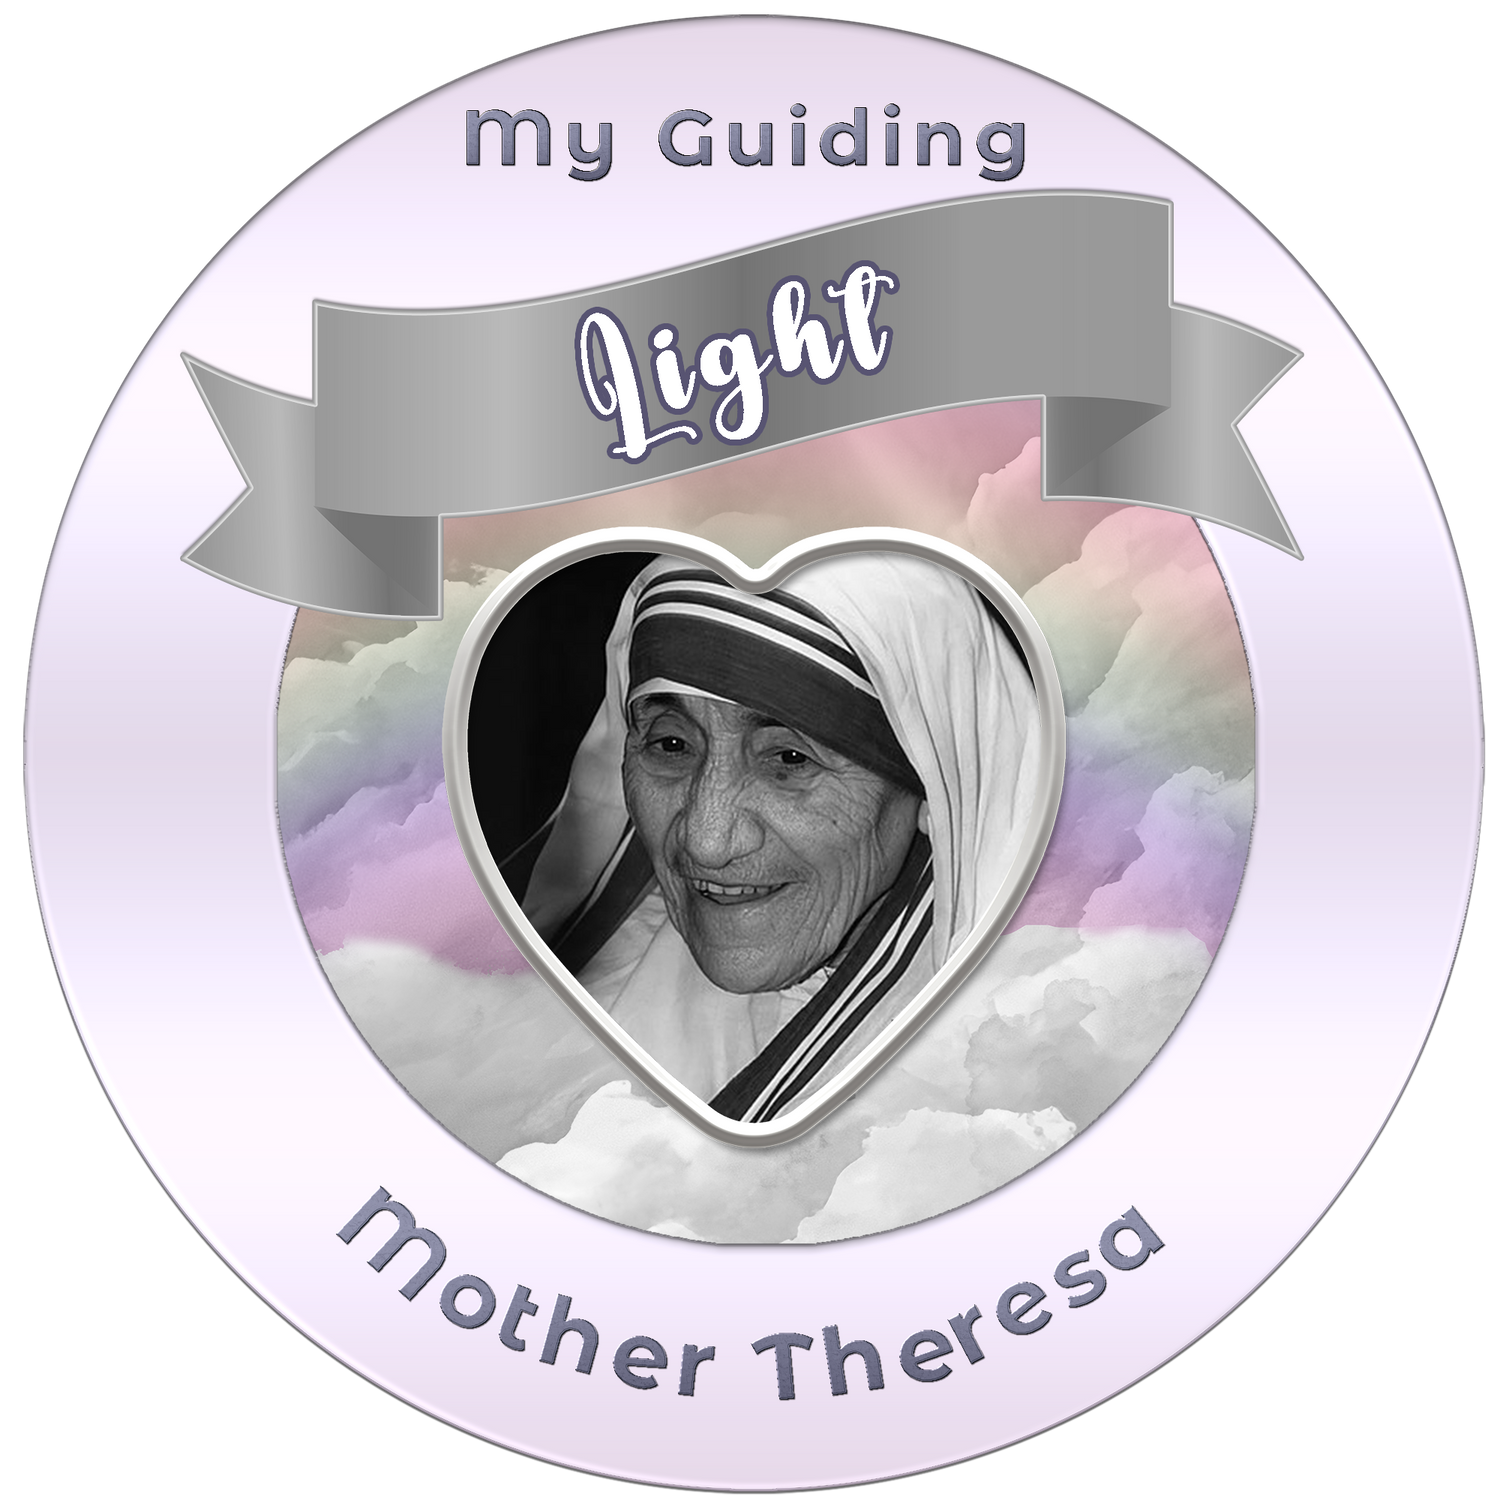 Mother Theresa - A Guiding Light For Love and humanitarianism.